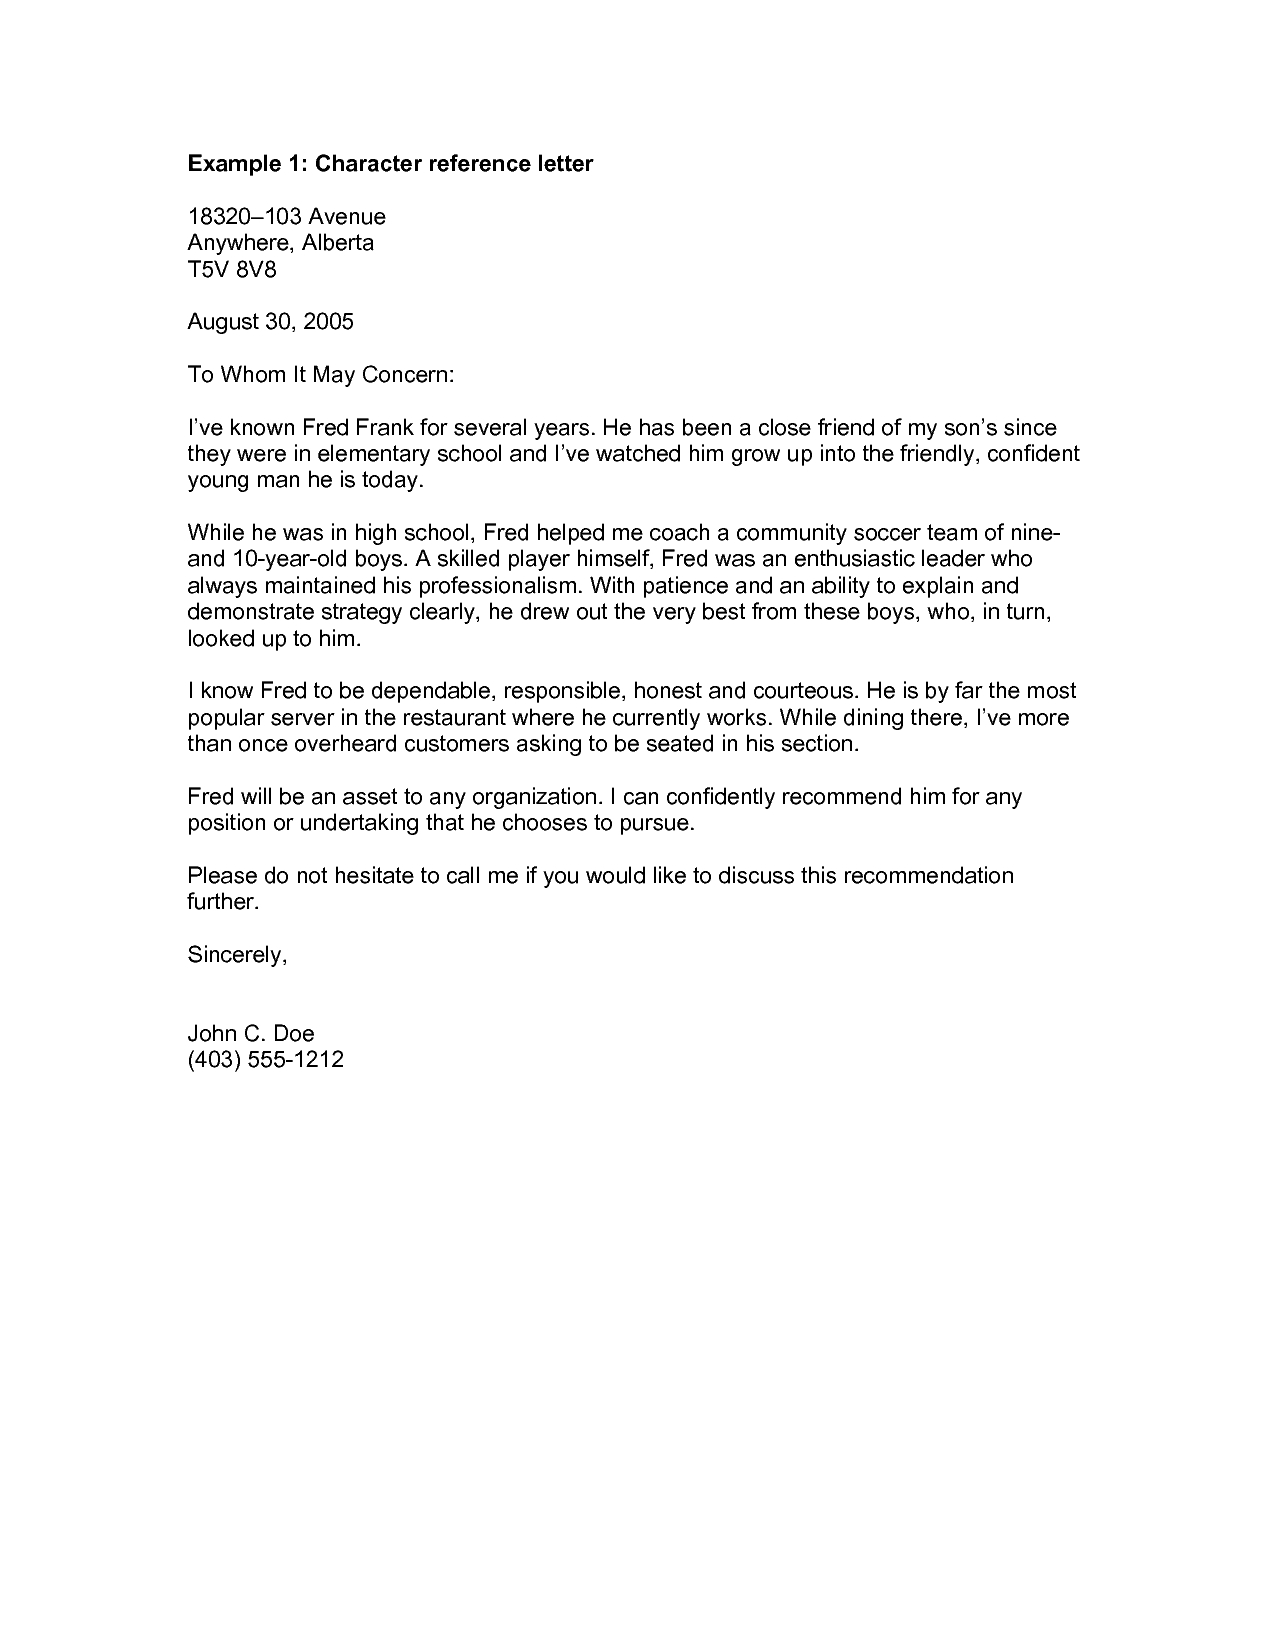 Free Rental Reference Letter Template - Re Mendation Letter for A Friend Template Opengovpartnersorgletter